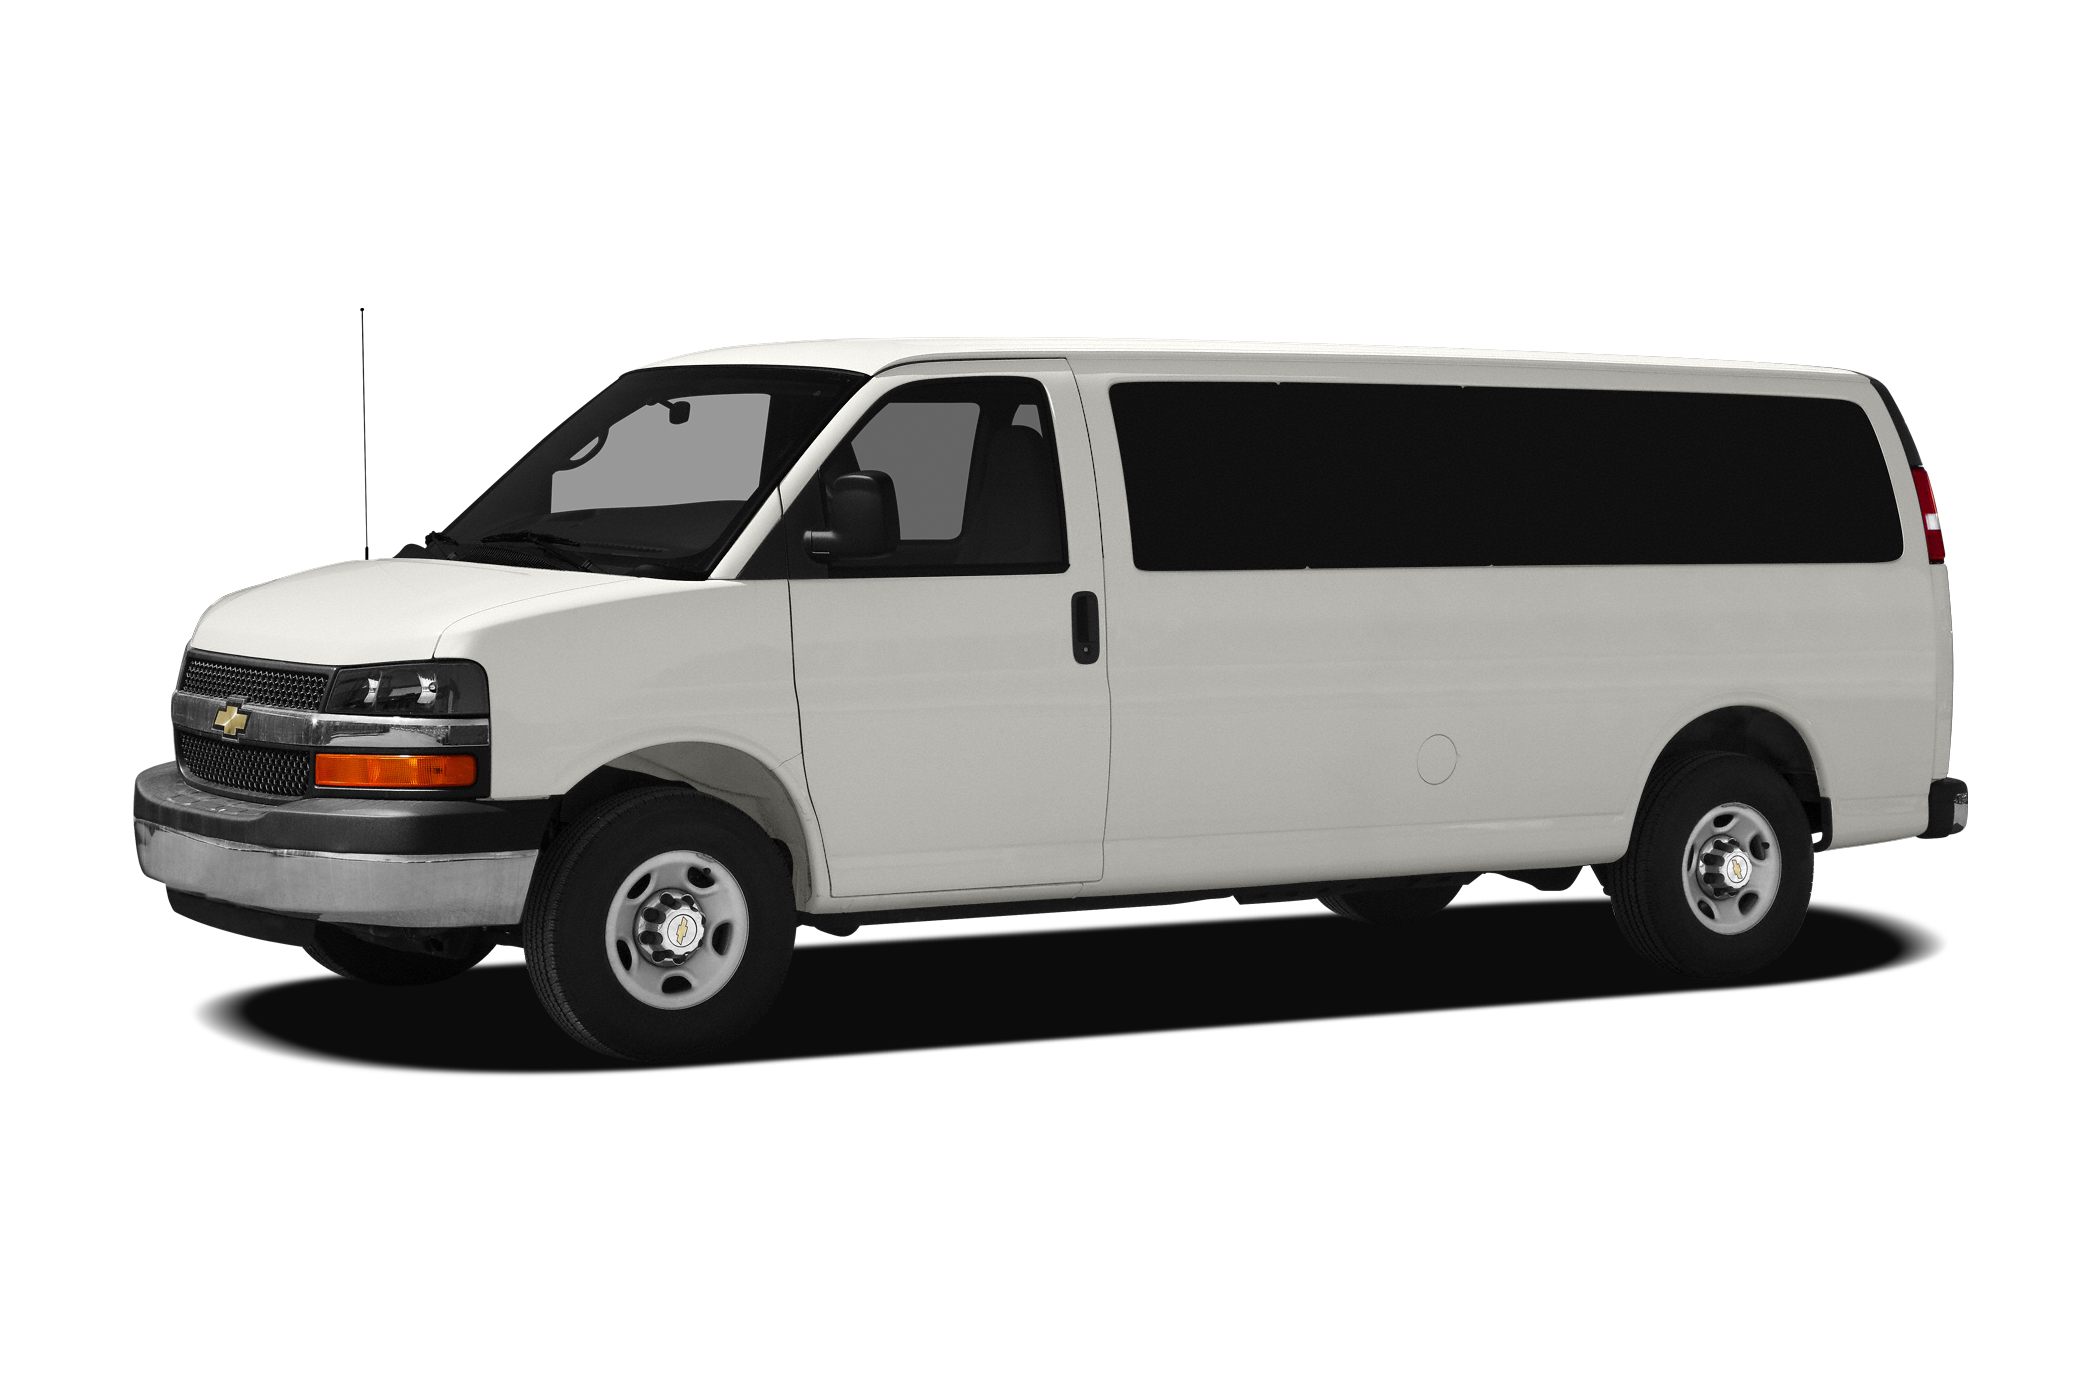 2012 Chevrolet Express 3500 Specs and 